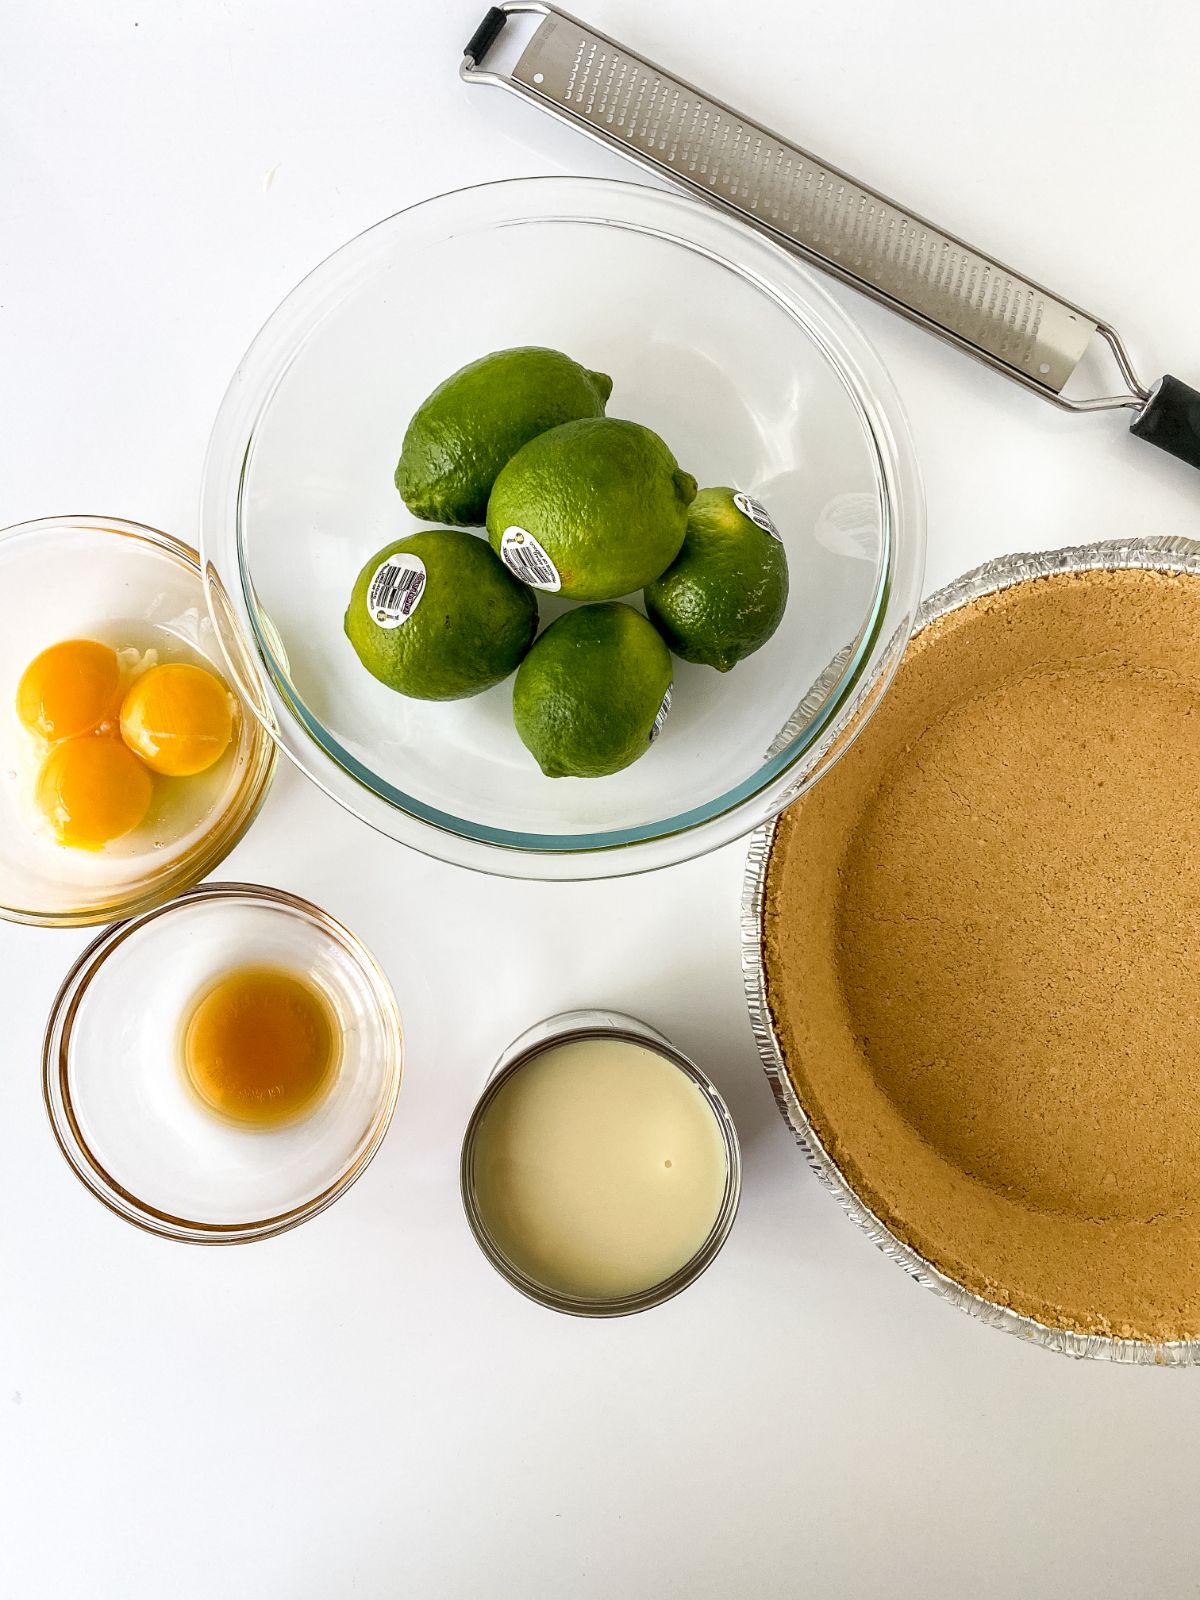 glass bowl of limes next to prepared graham cracker crust